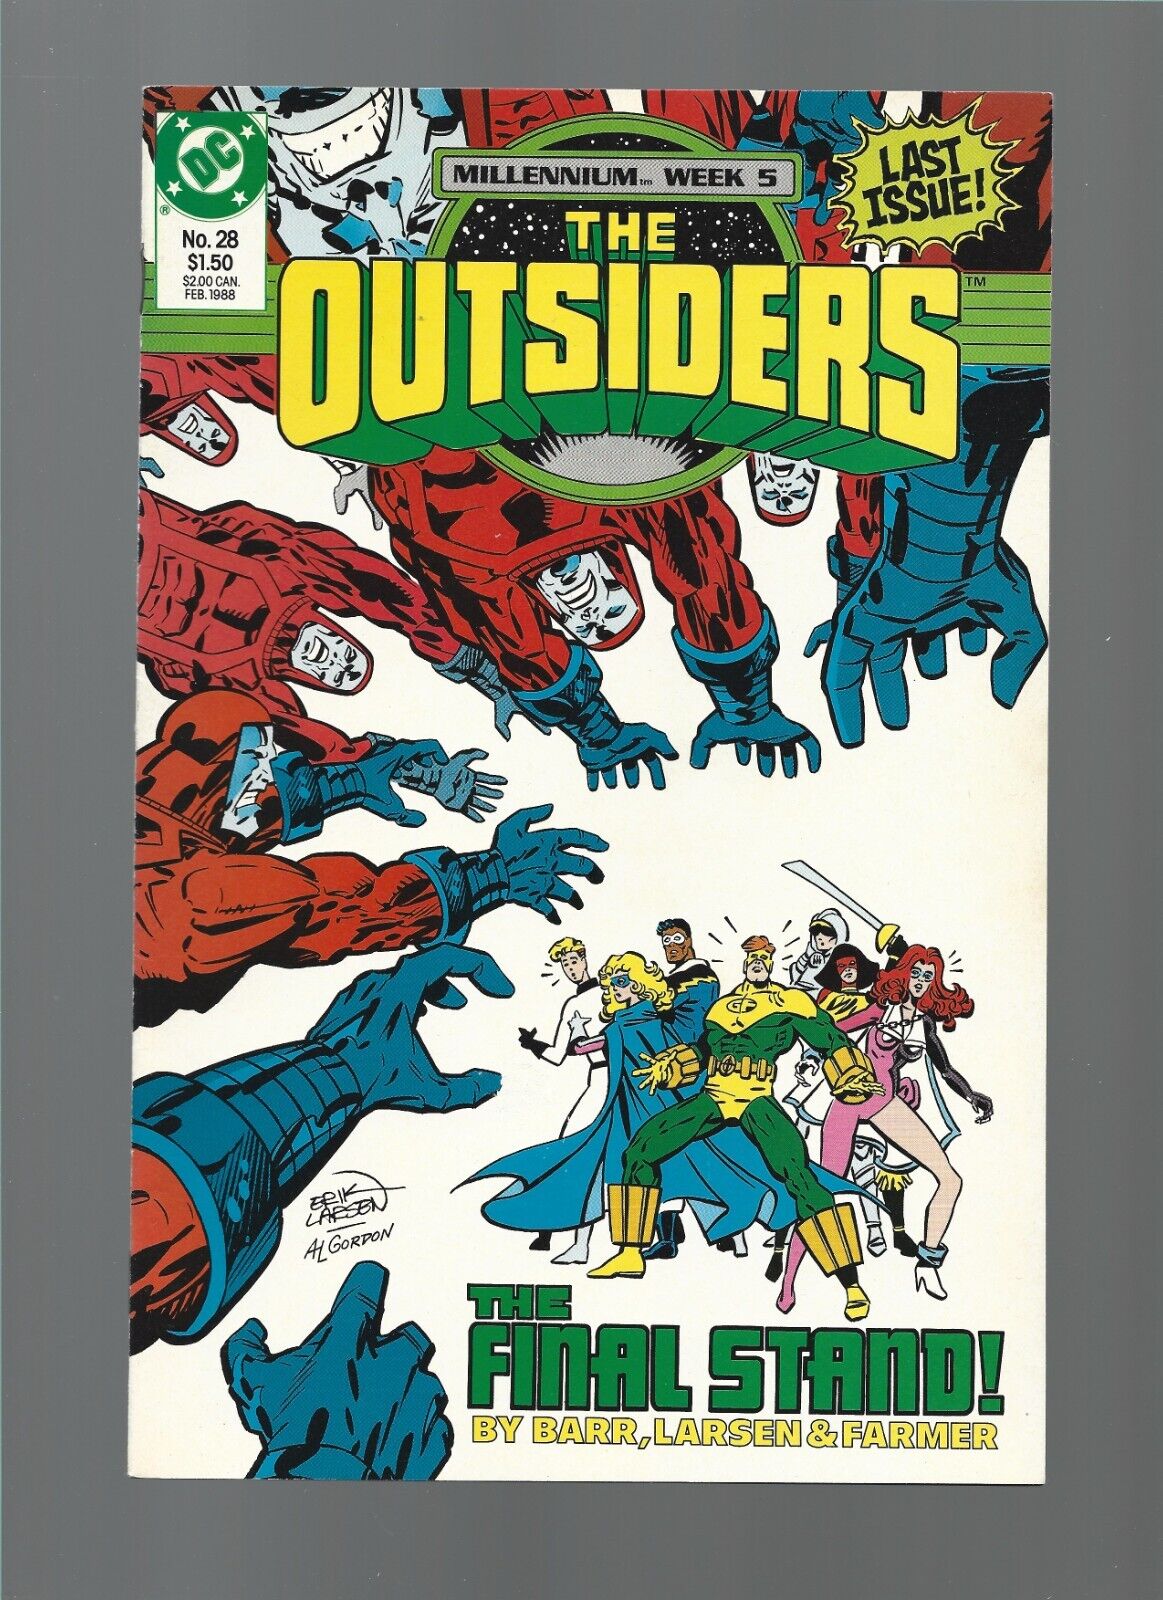 The Outsiders #28 Last Issue / UNLIMITED SHIPPING $4.99